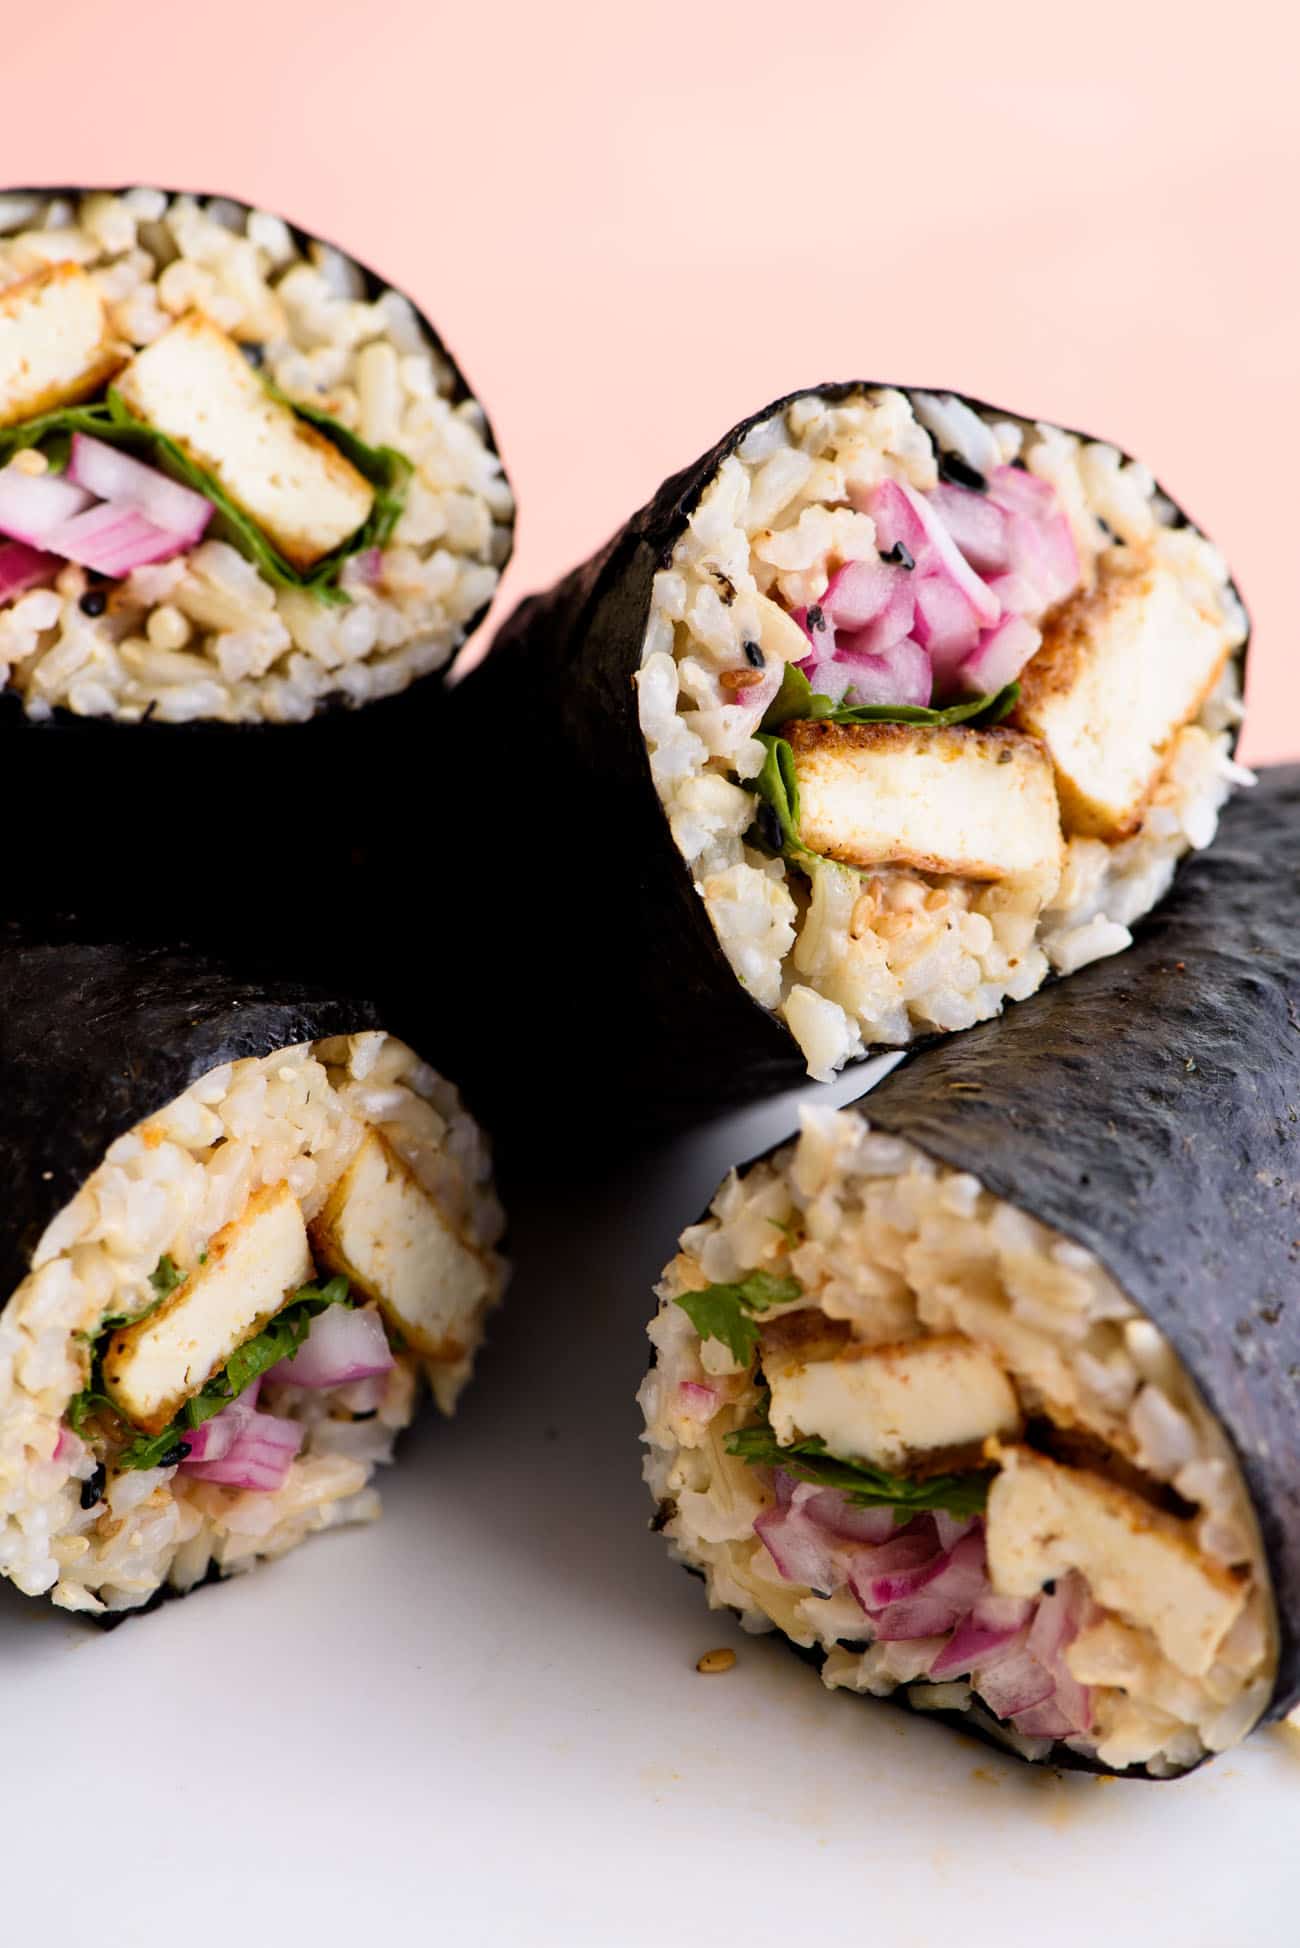 Sushi burrito halves (filled with brown rice, crispy tofu, and quick-pickled onions) stacked on a white plate